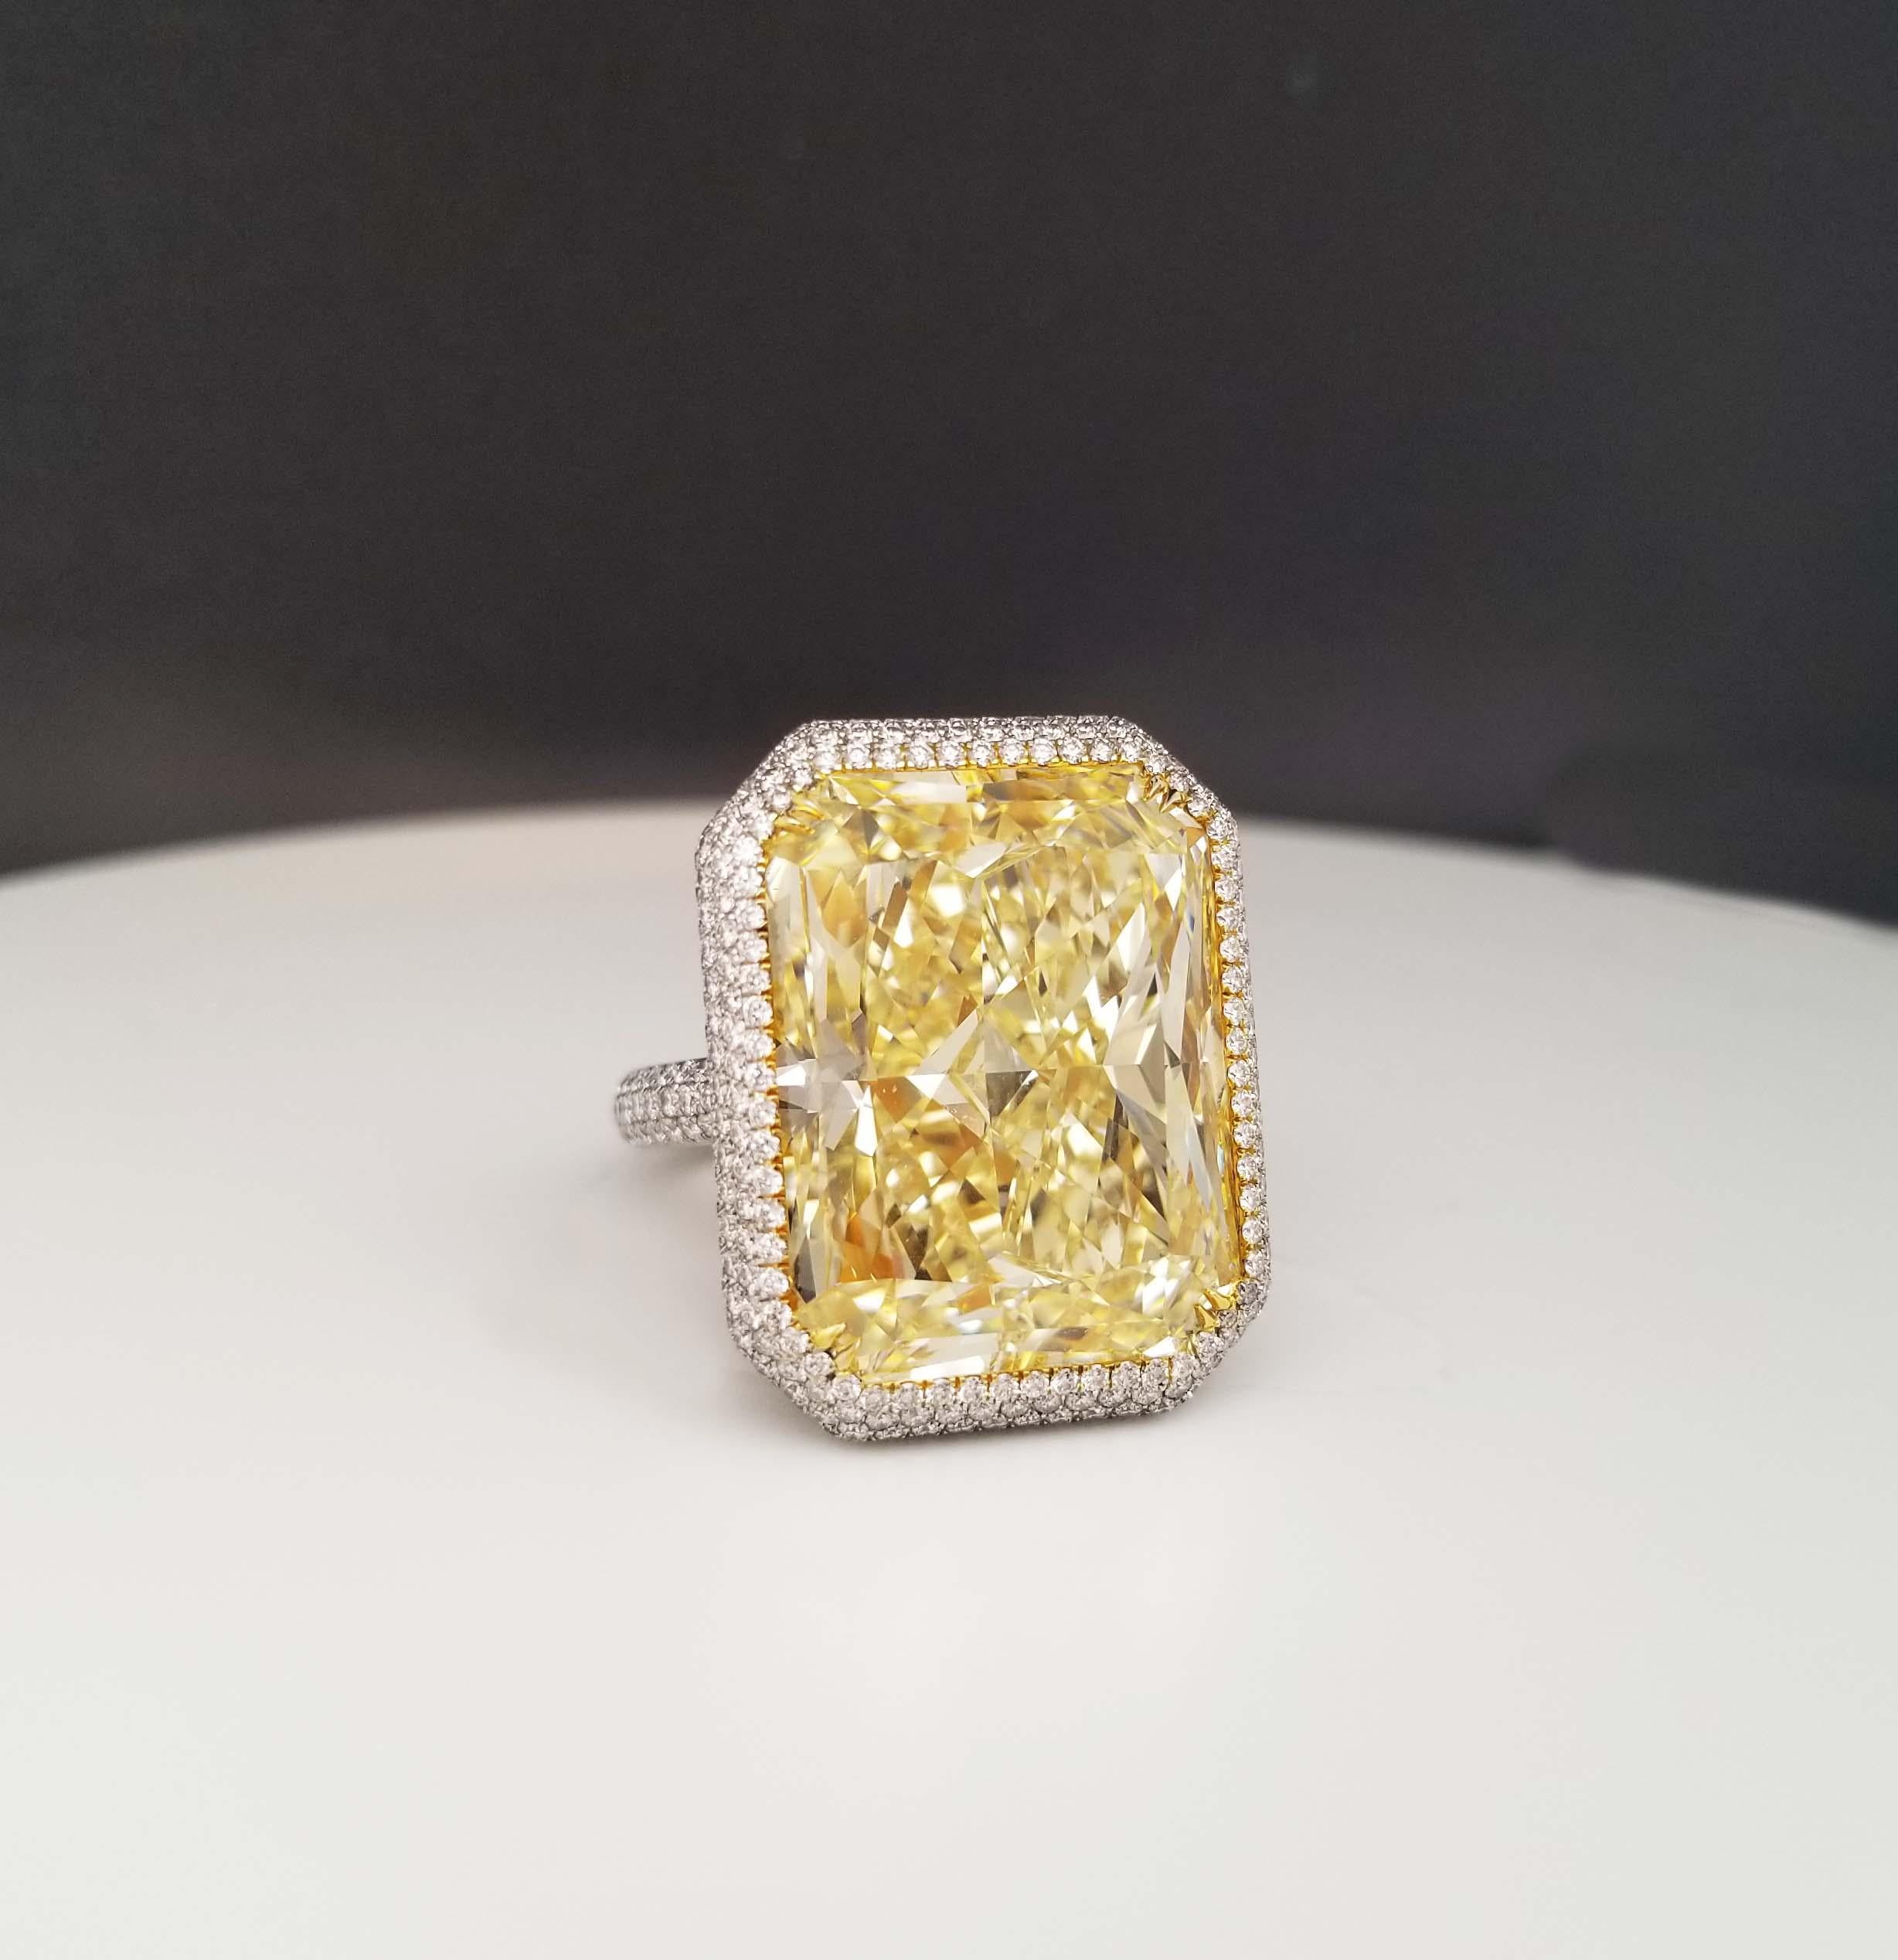 Radiant Cut Scarselli 31 Carat Natural Fancy Yellow Diamond Ring VS1 Clarity in Platinum GIA For Sale